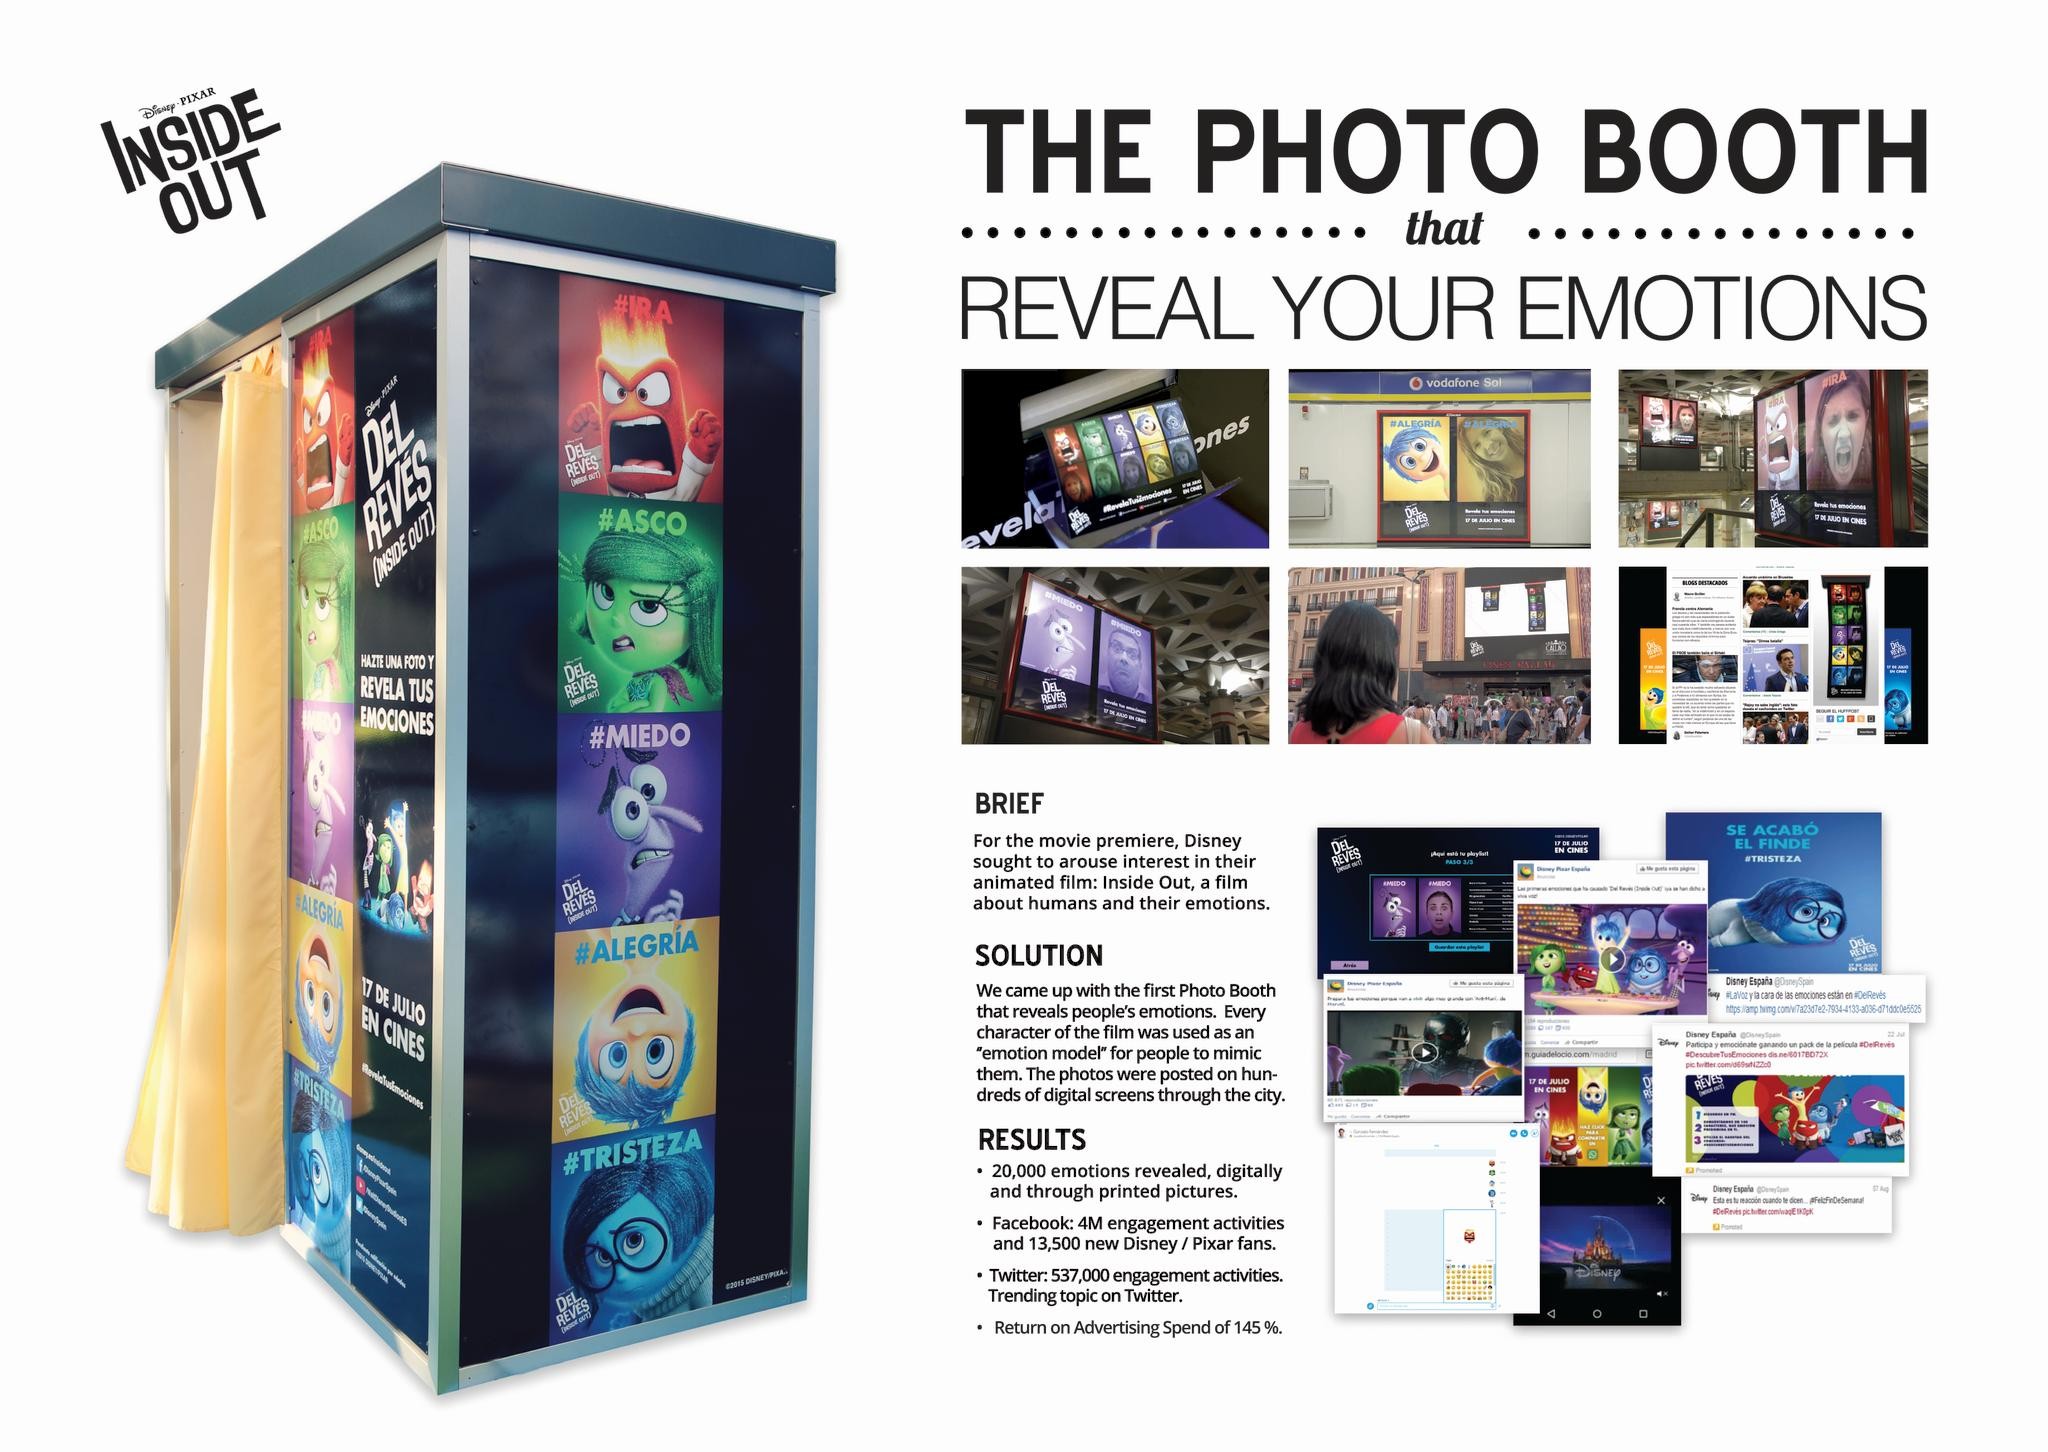 THE PHOTO BOOTH THAT REVEALS YOUR EMOTIONS